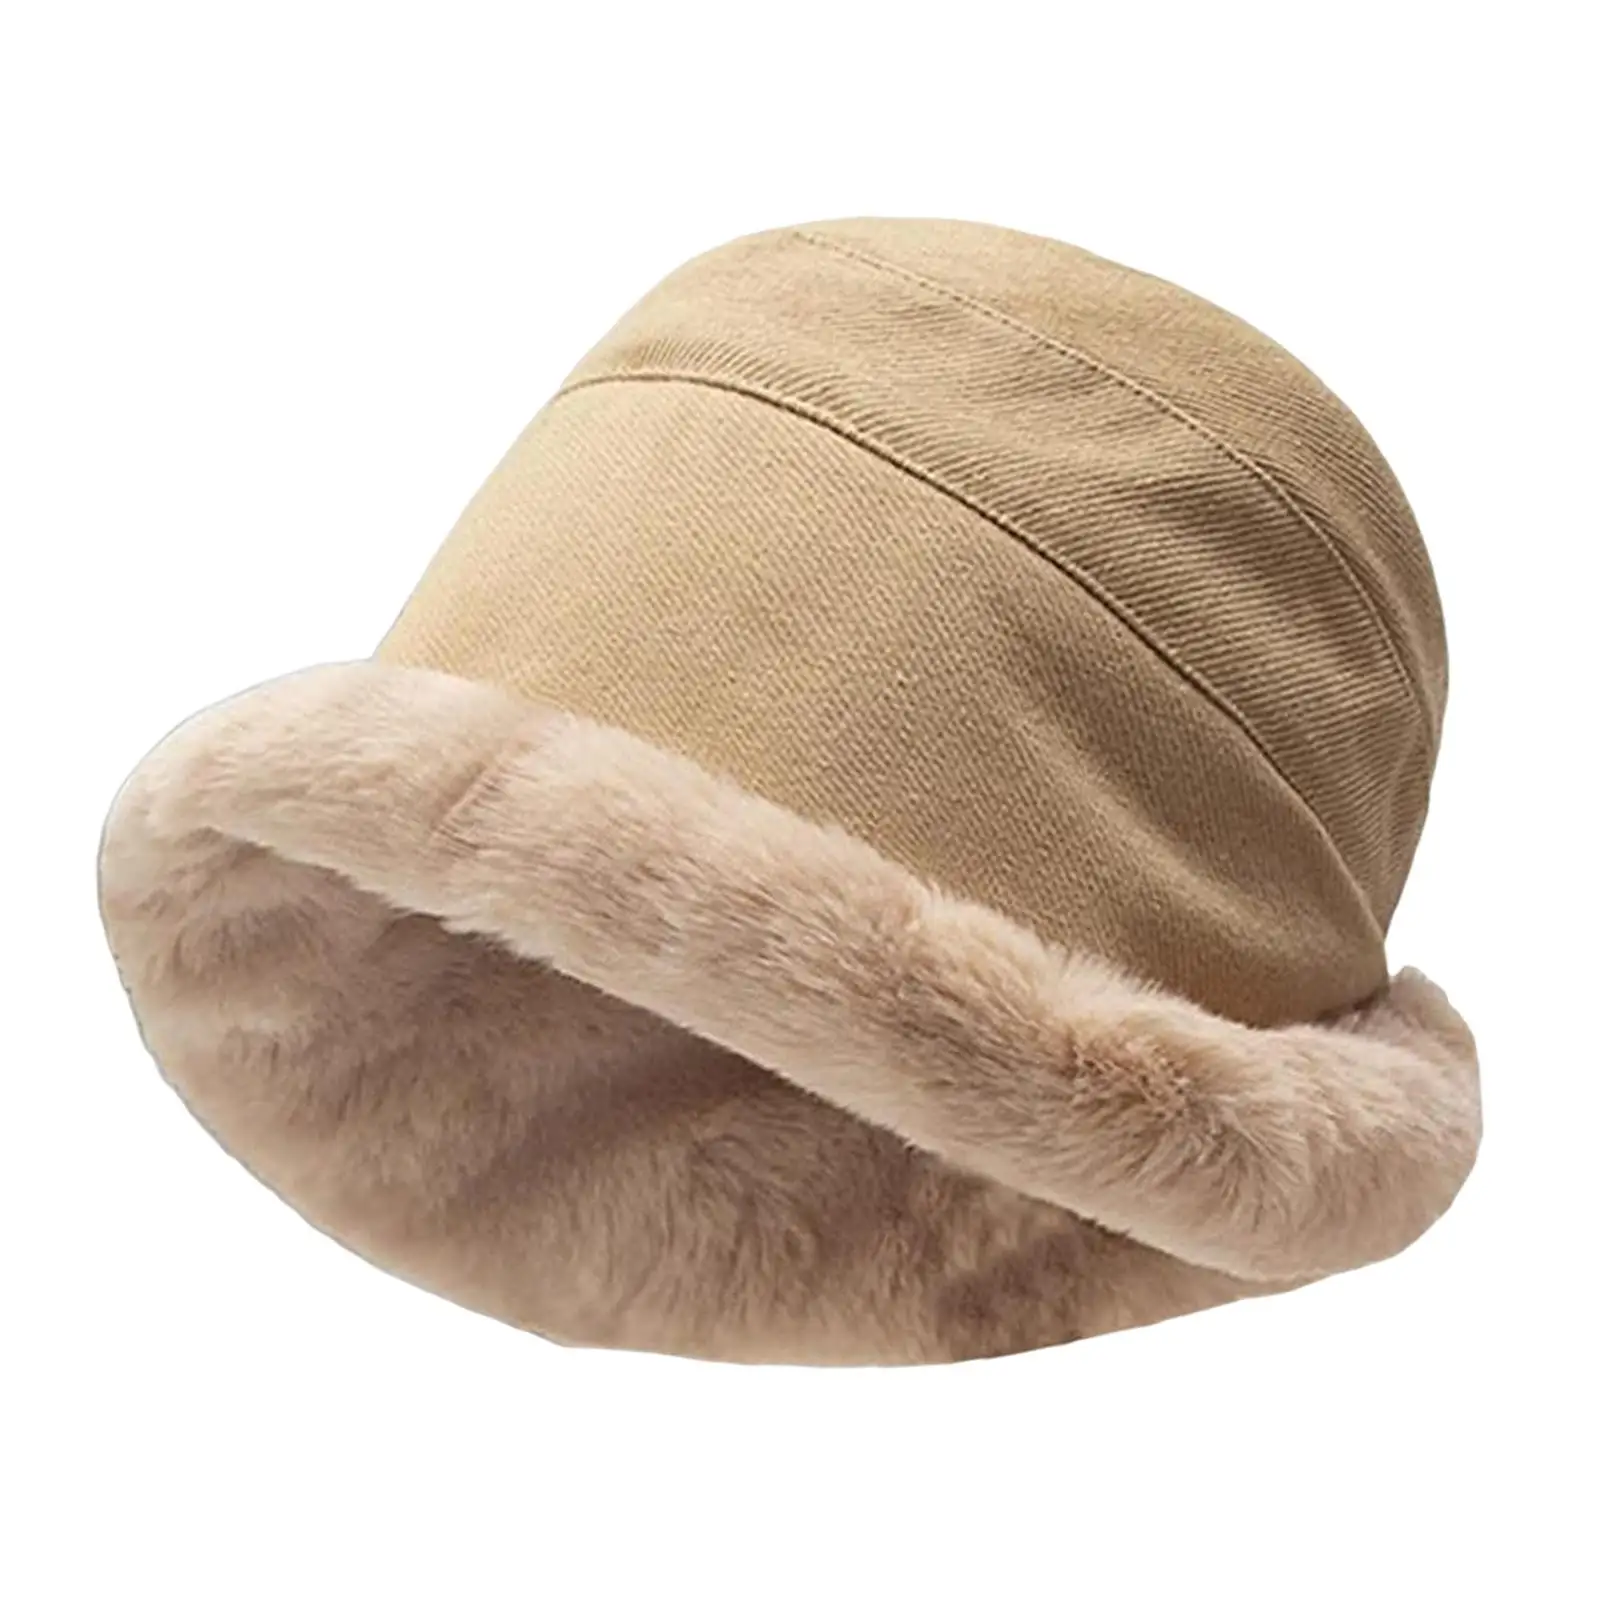 Winter Bucket Hat Casual Comfortable Fashion Solid Color Windproof Plush Warm Soft for Ladies Girls